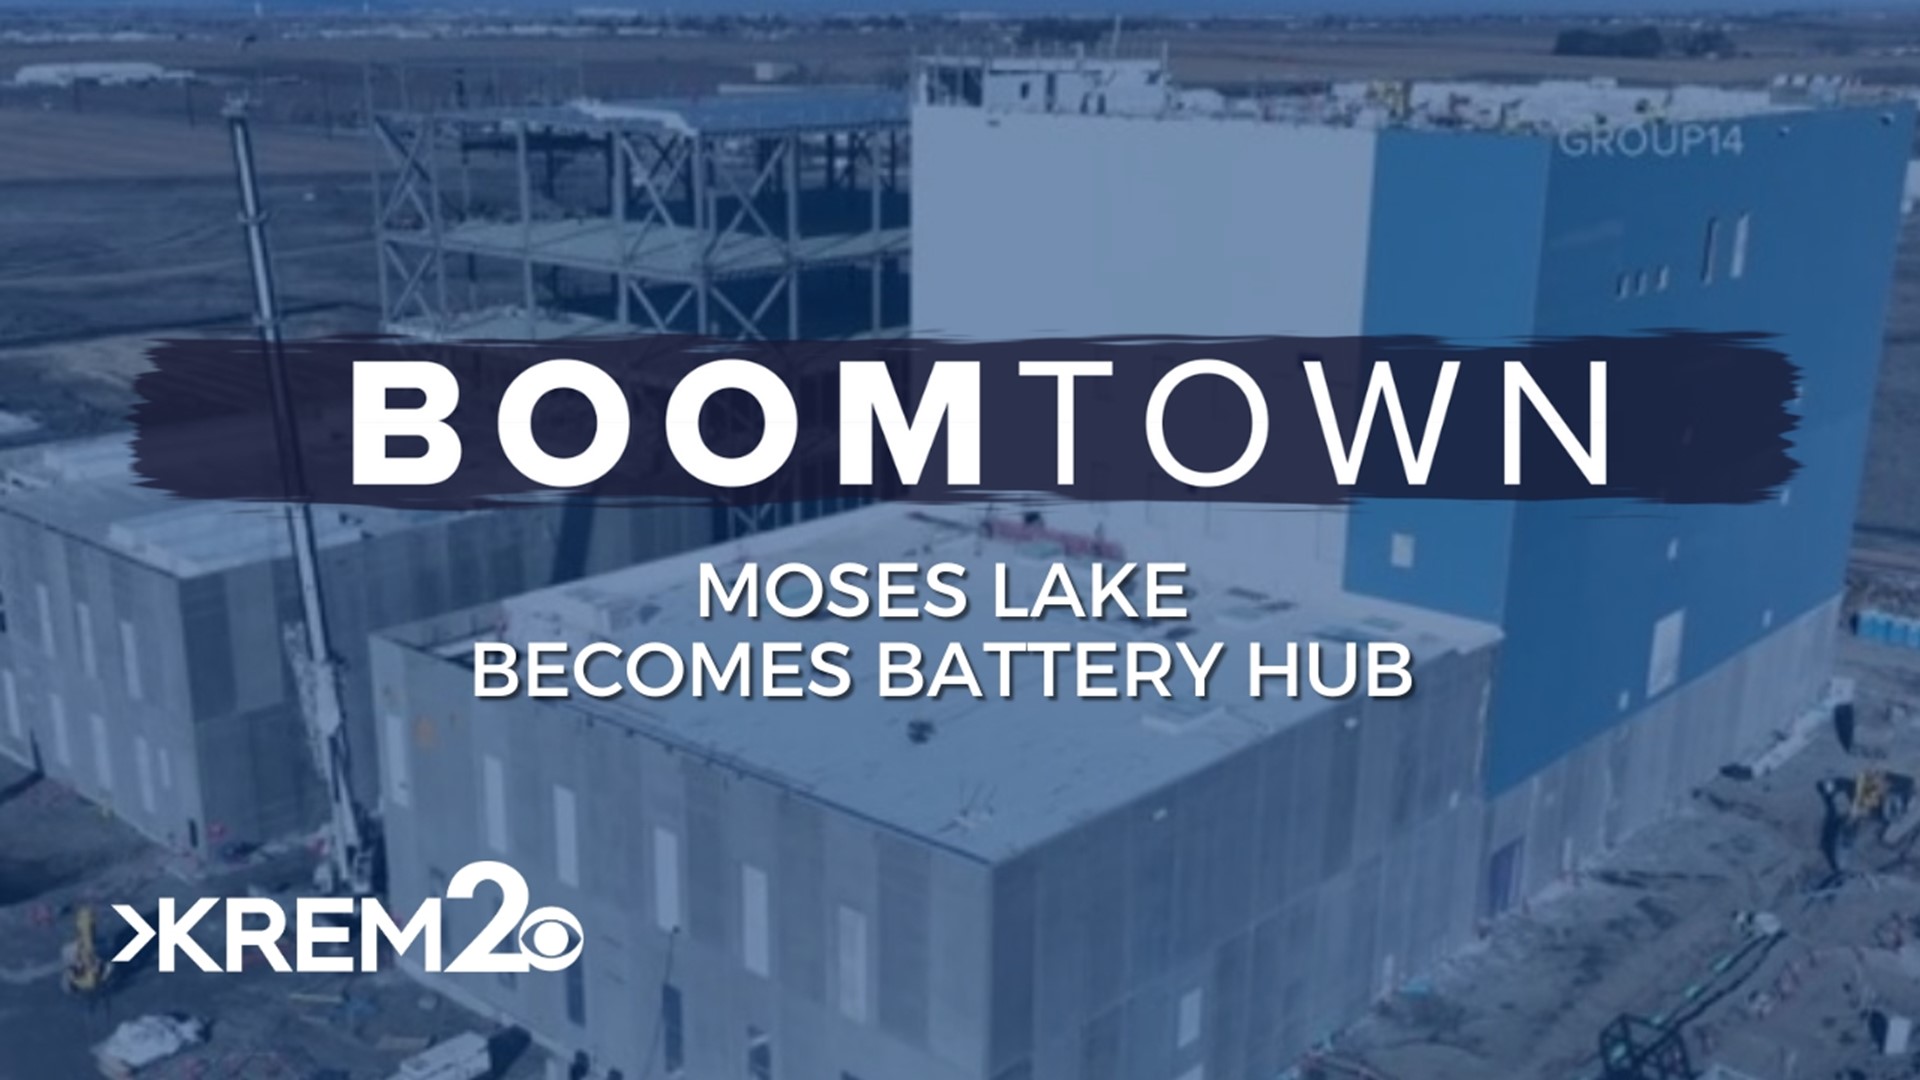 Last year, Sila and Group14  invested each of their $100 million federal grants into building manufacturing facilities in Moses Lake.